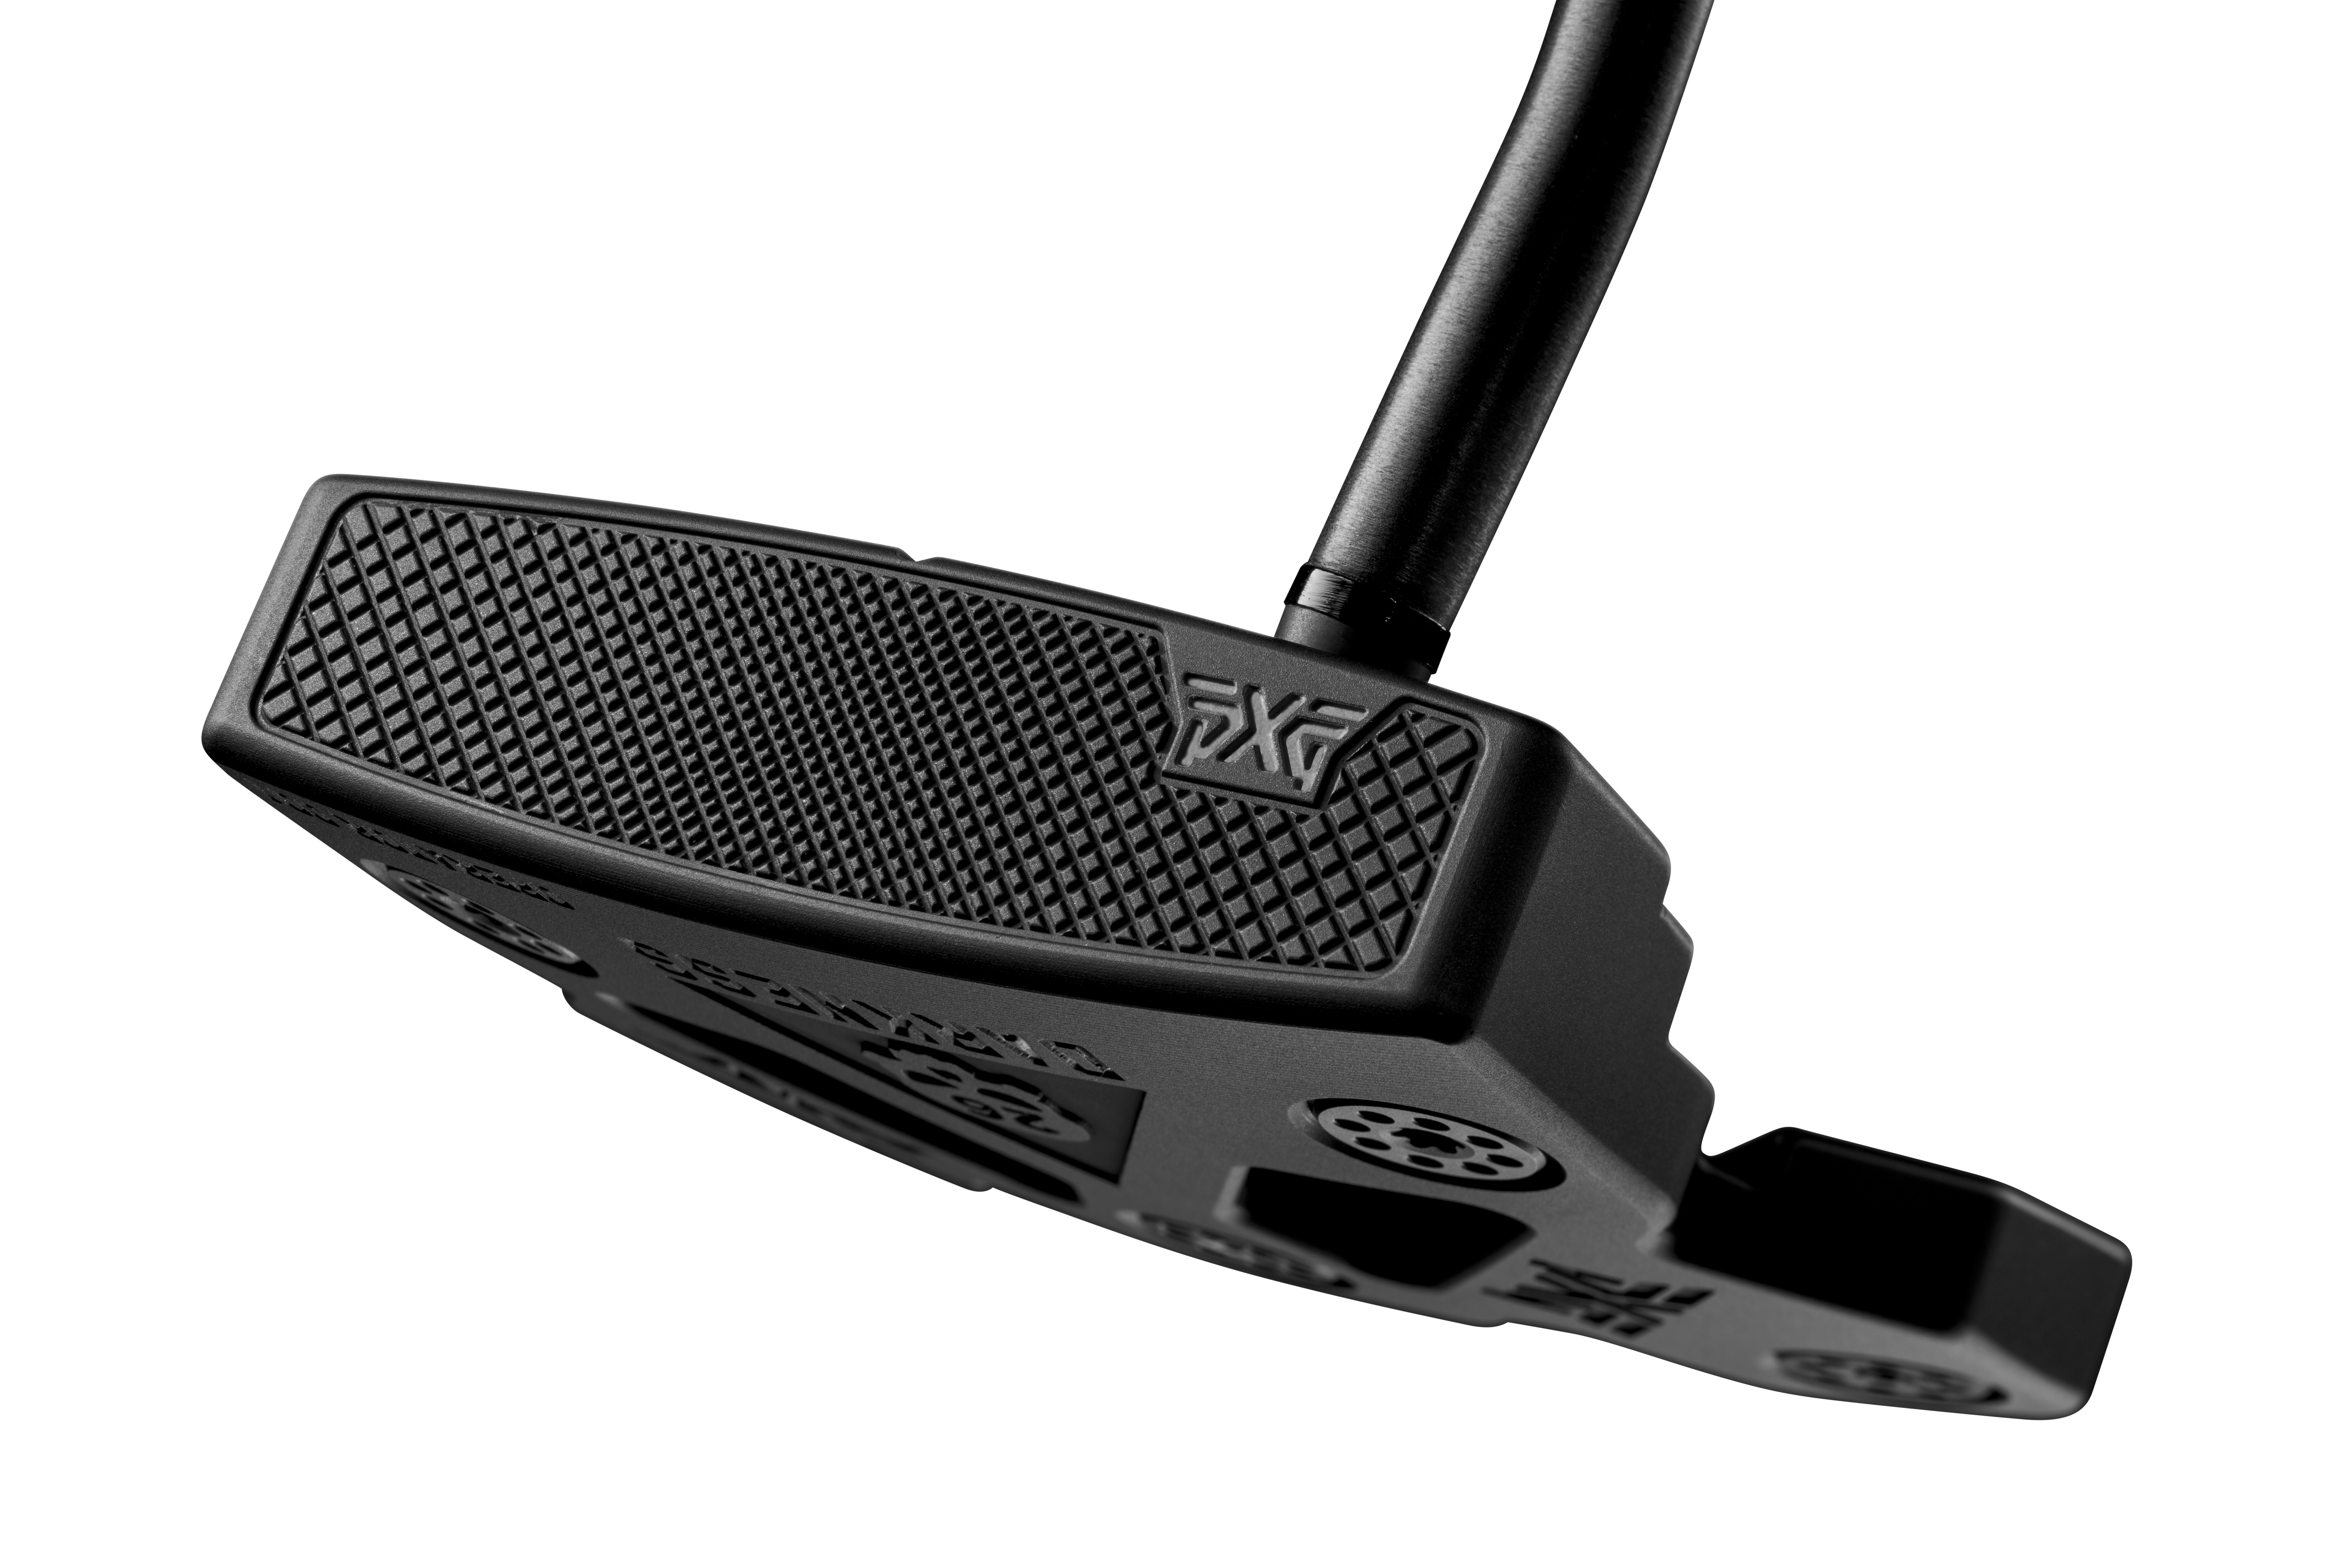 PXG unveils its Darkness Operator limited-edition putter (at $700 